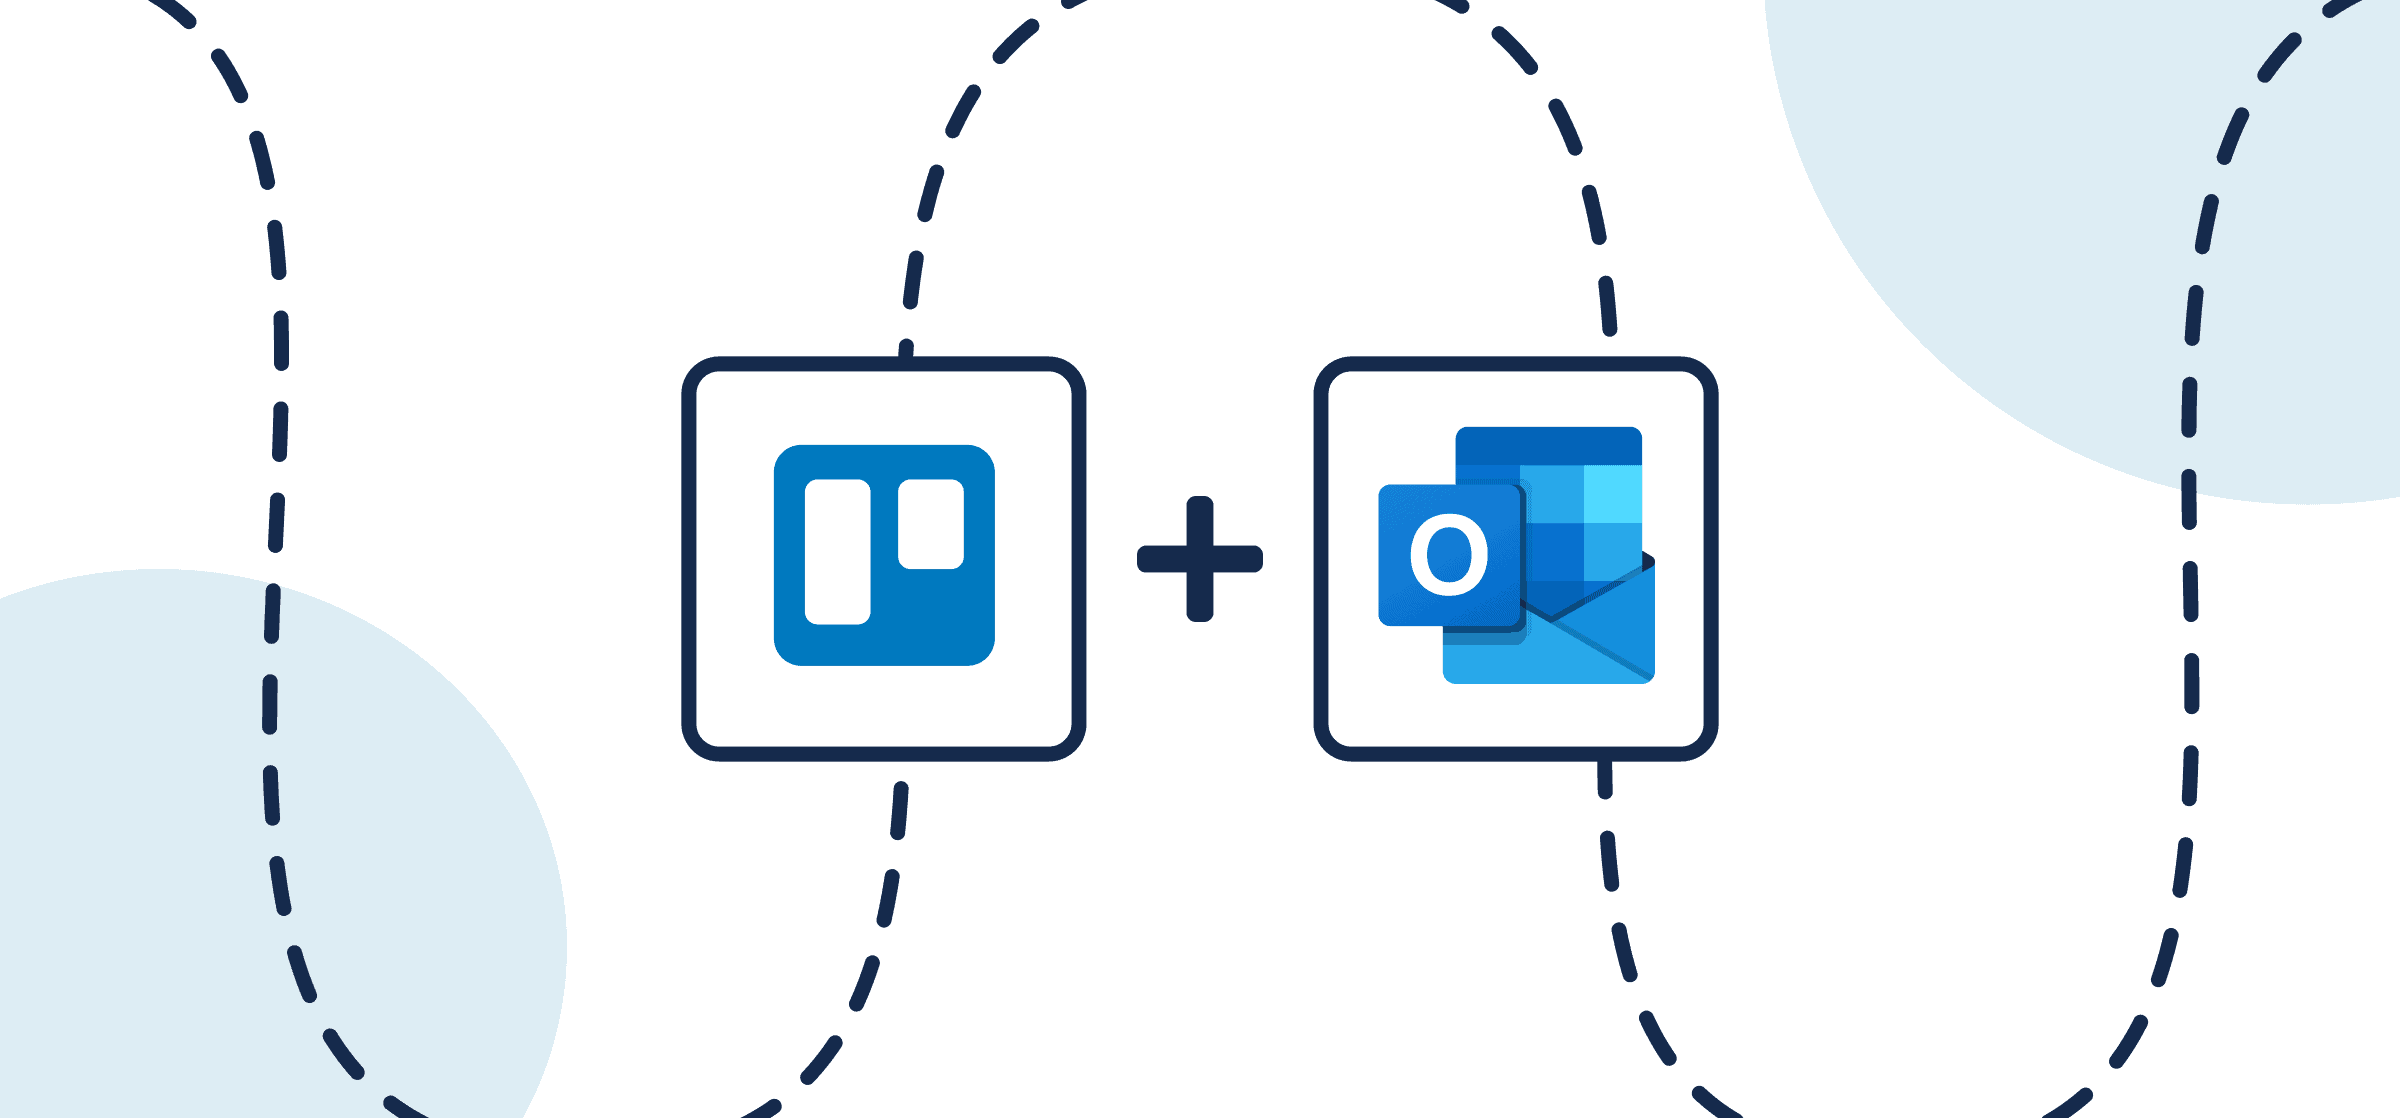 Featured image illustrating a step-by-step guide on syncing Trello to Microsoft Outlook through Unito, depicted by the connected logos through circles and dotted lines.